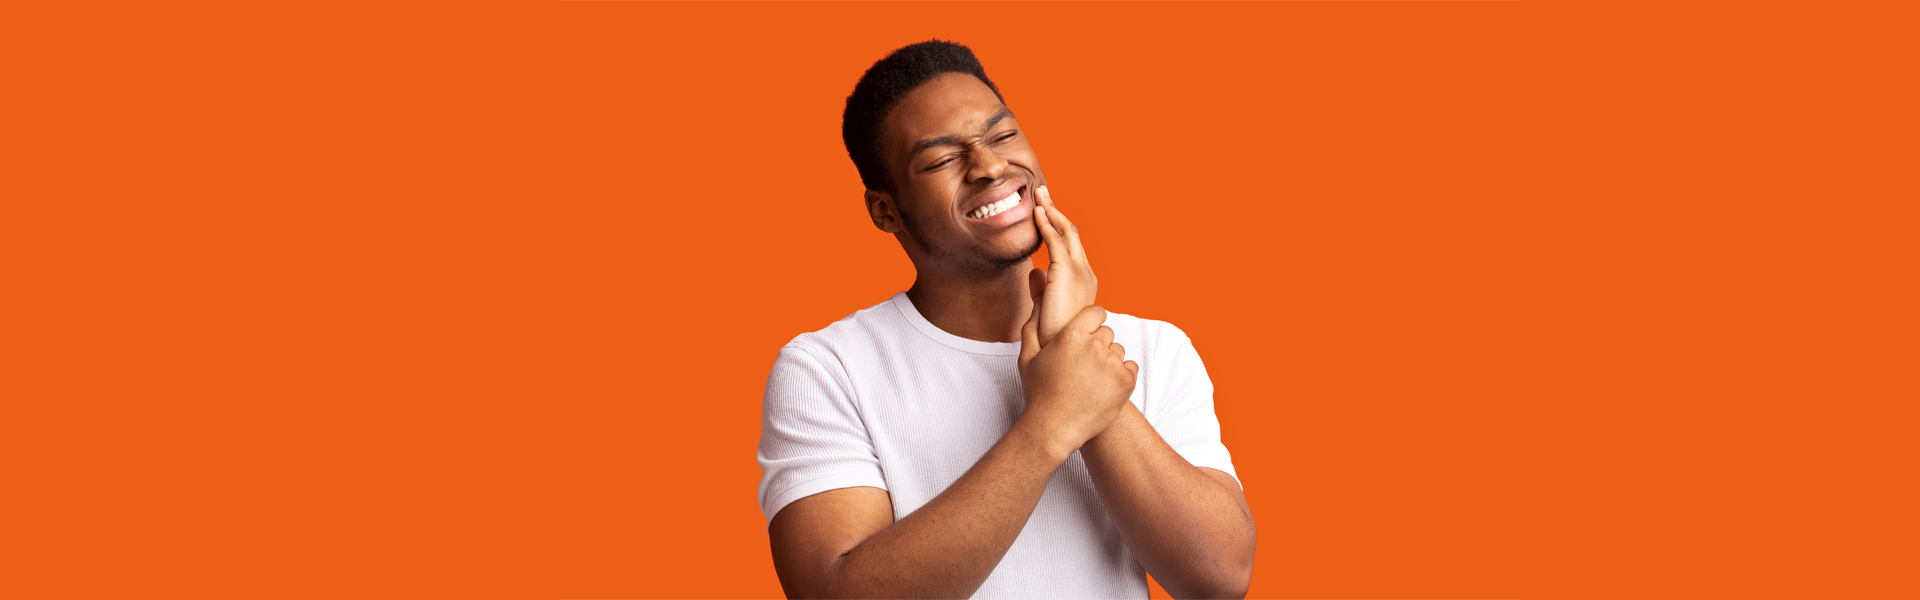 Trigger Point Massage and Jaw Exercises Help Relieve TMJ Jaw Pain